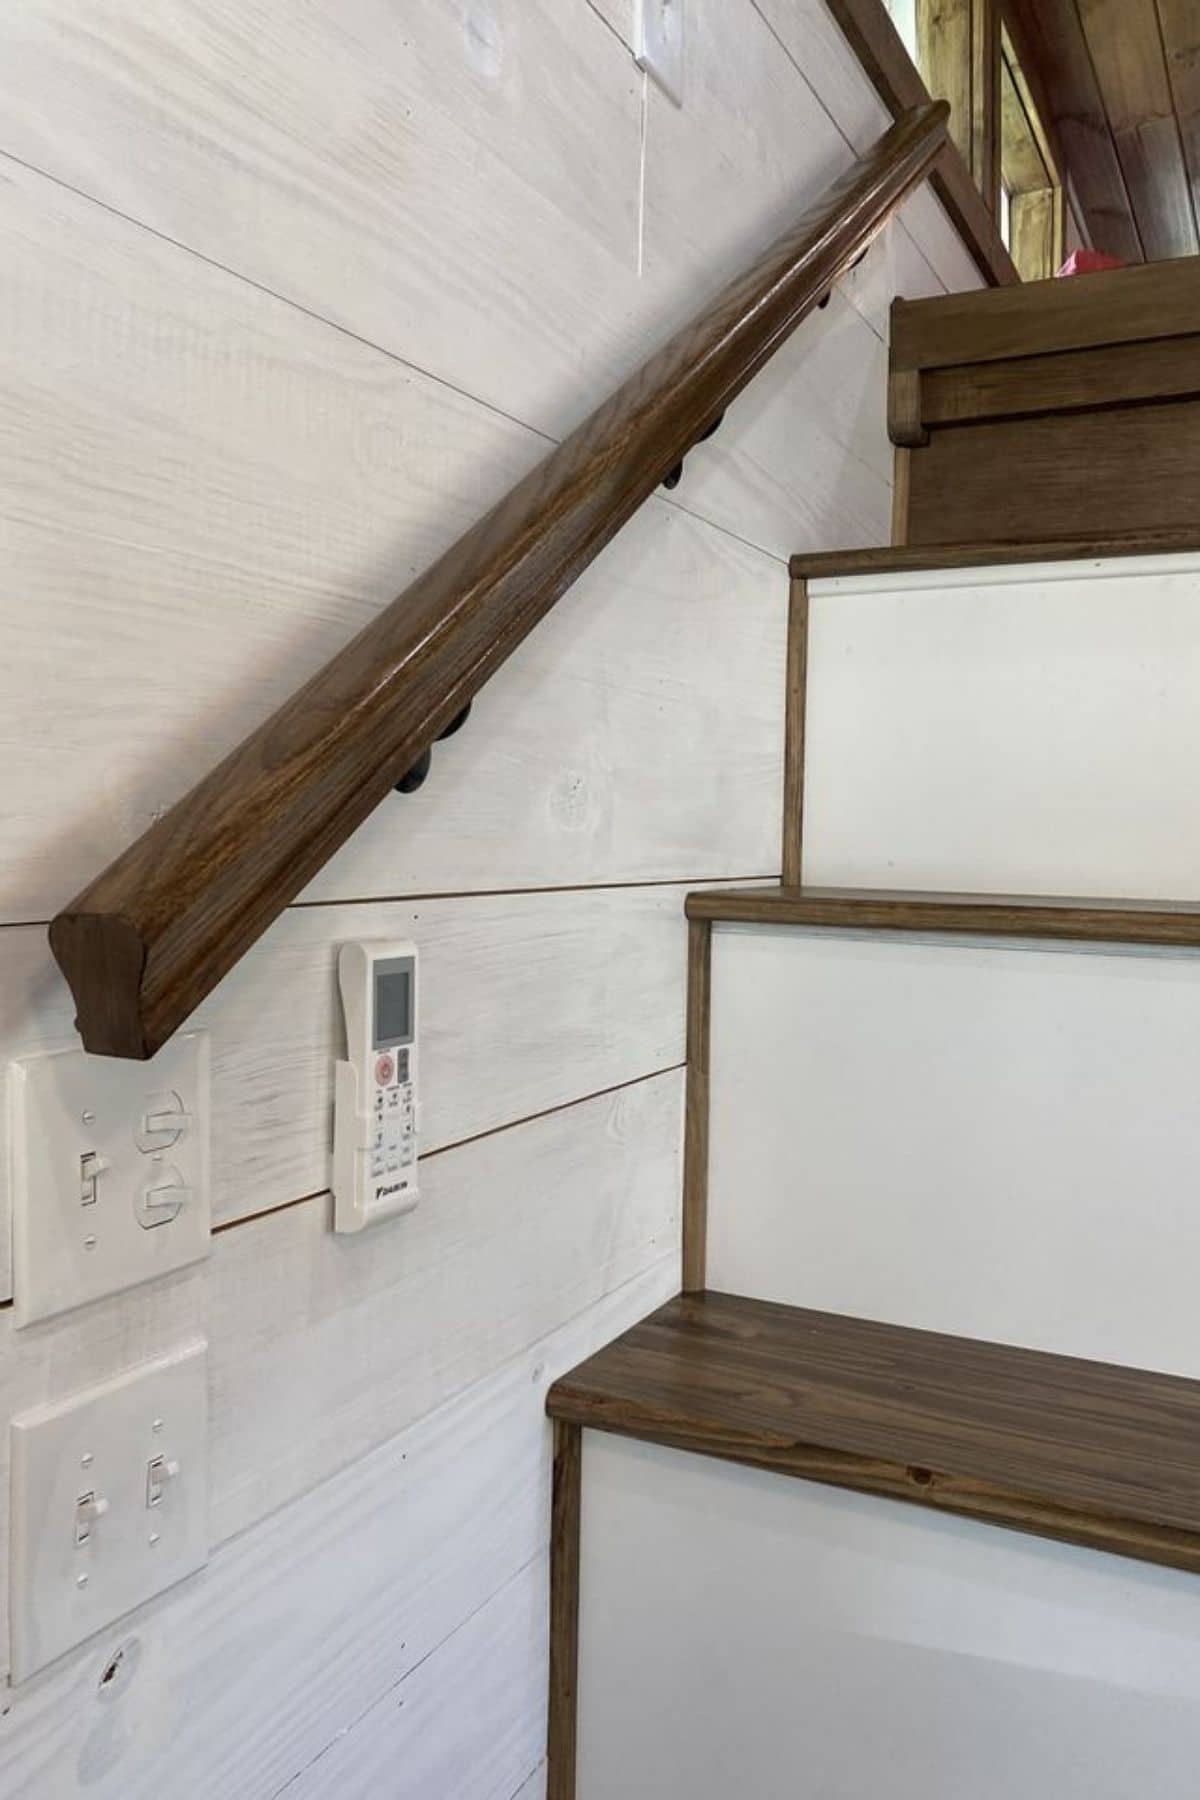 wood railing onw all by stairs to loft